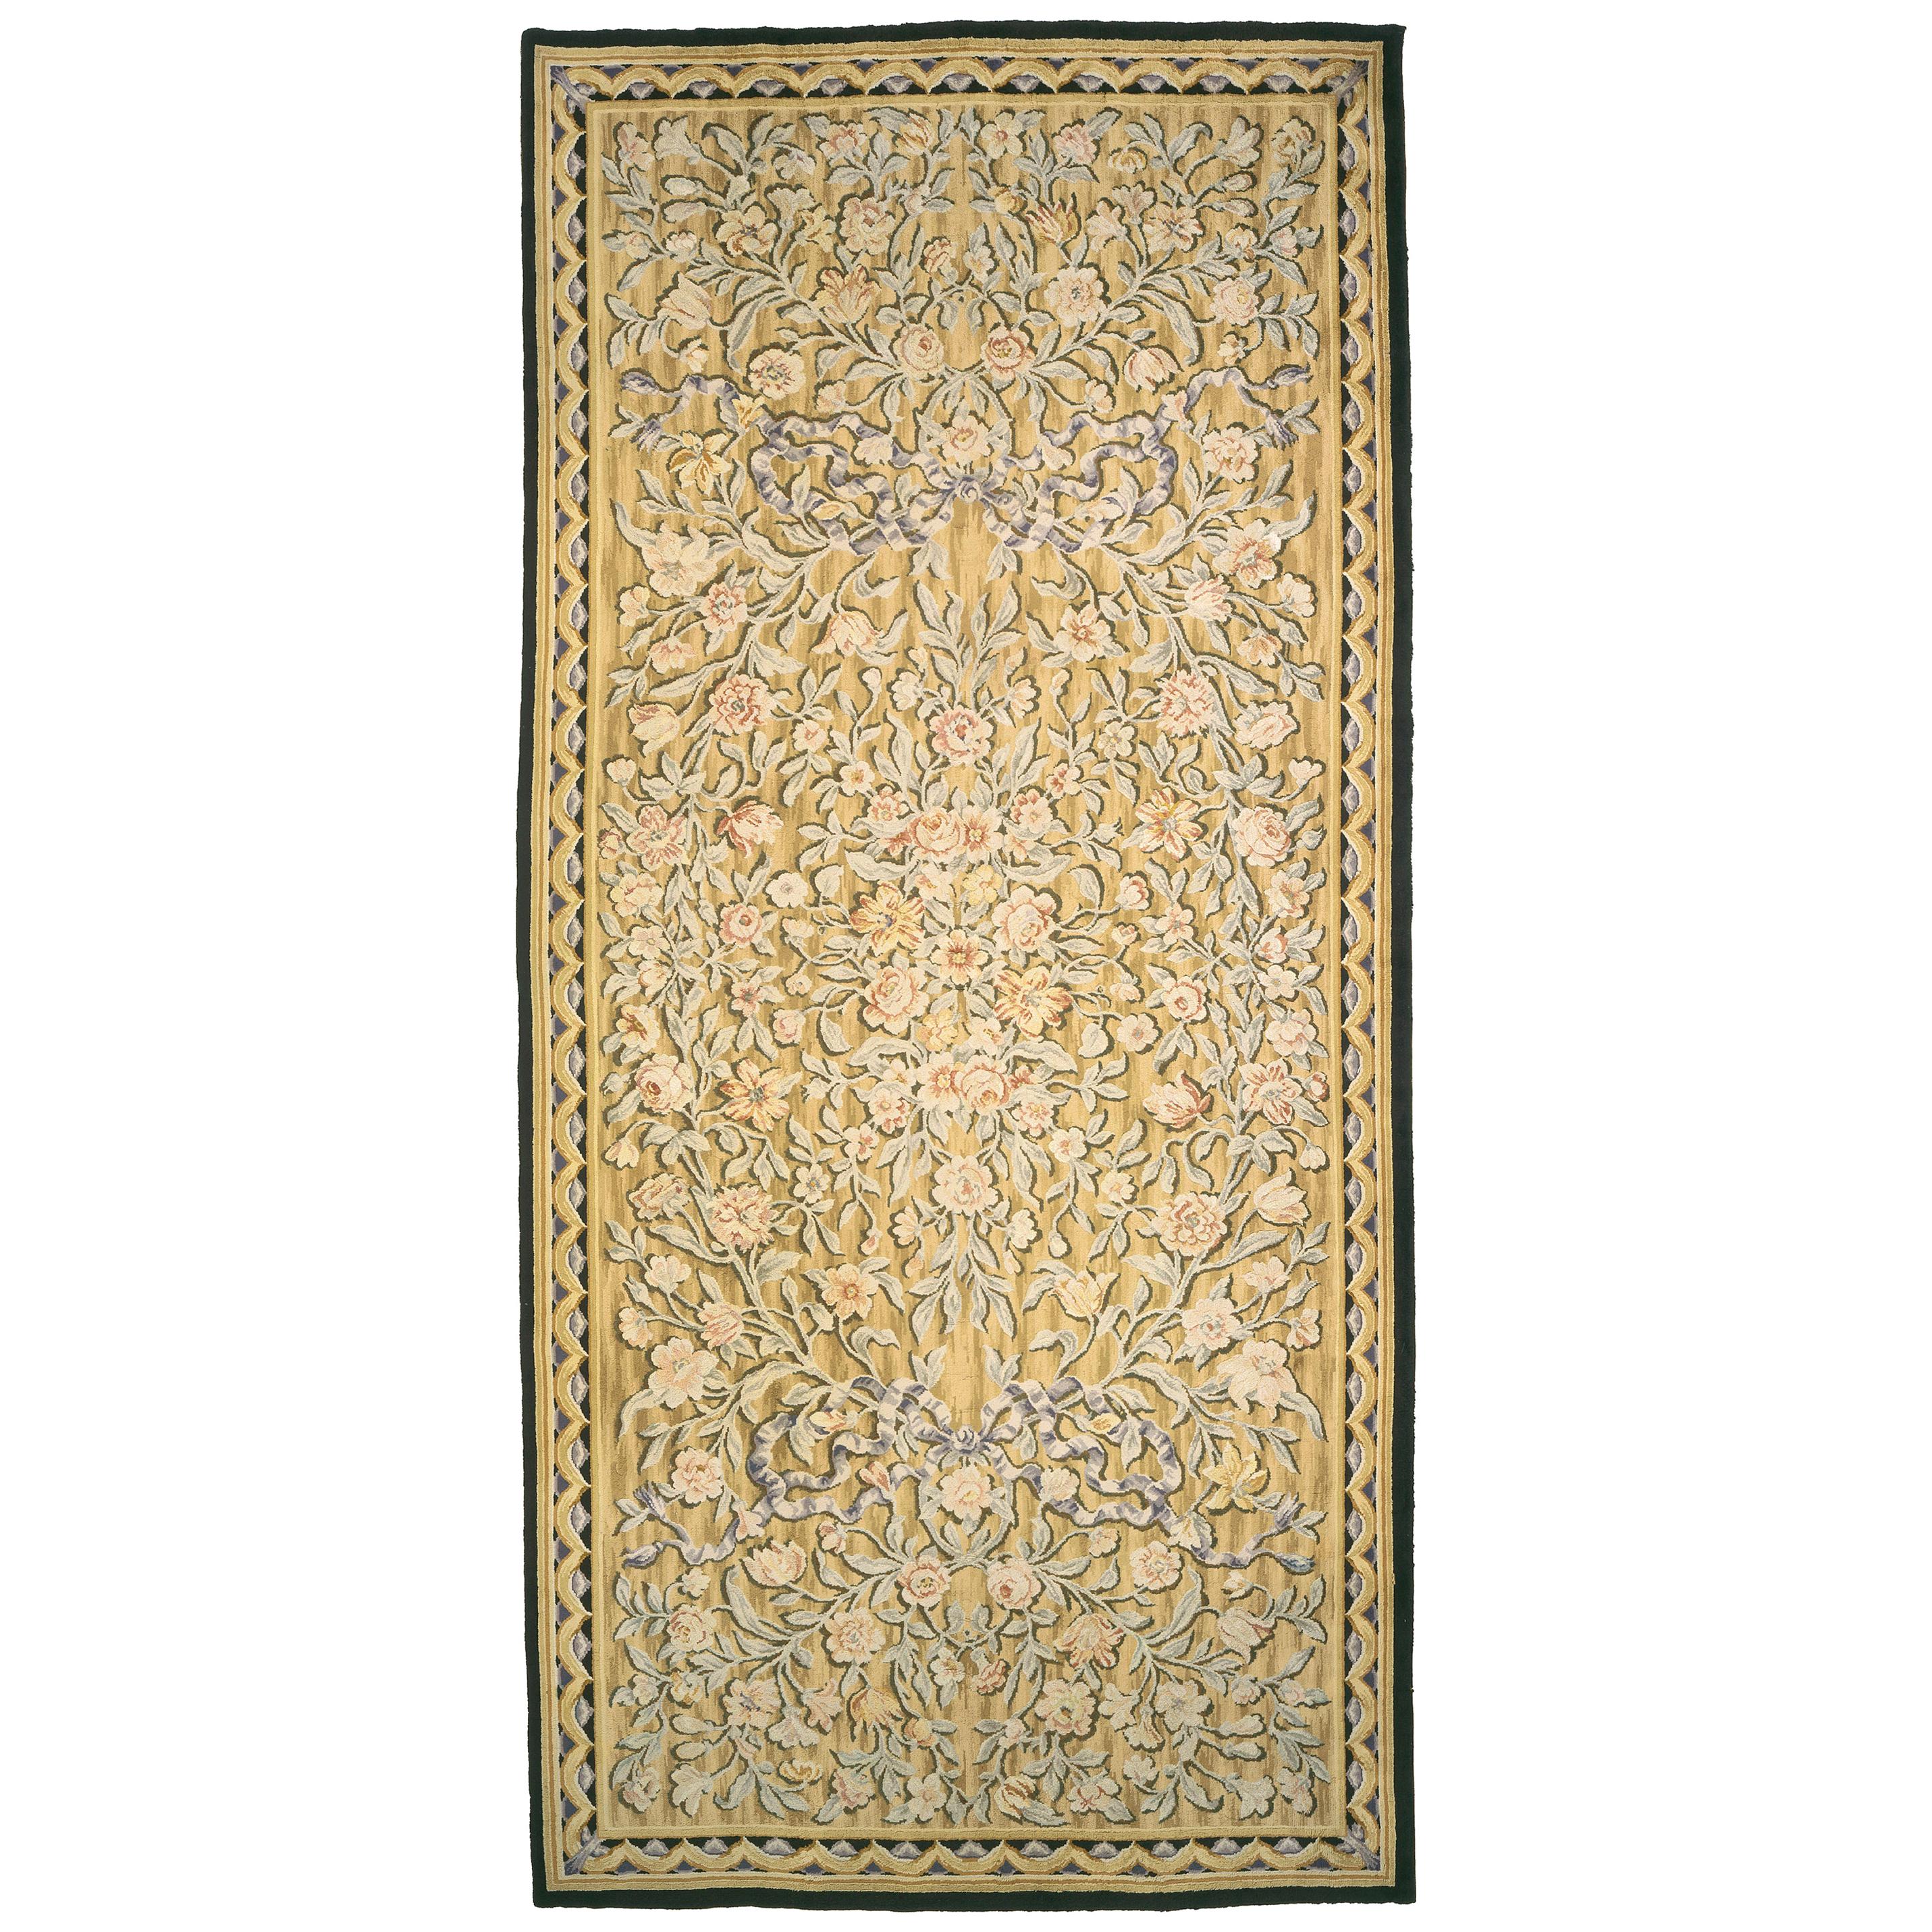 Early 20th Century French Savonnerie Rug For Sale